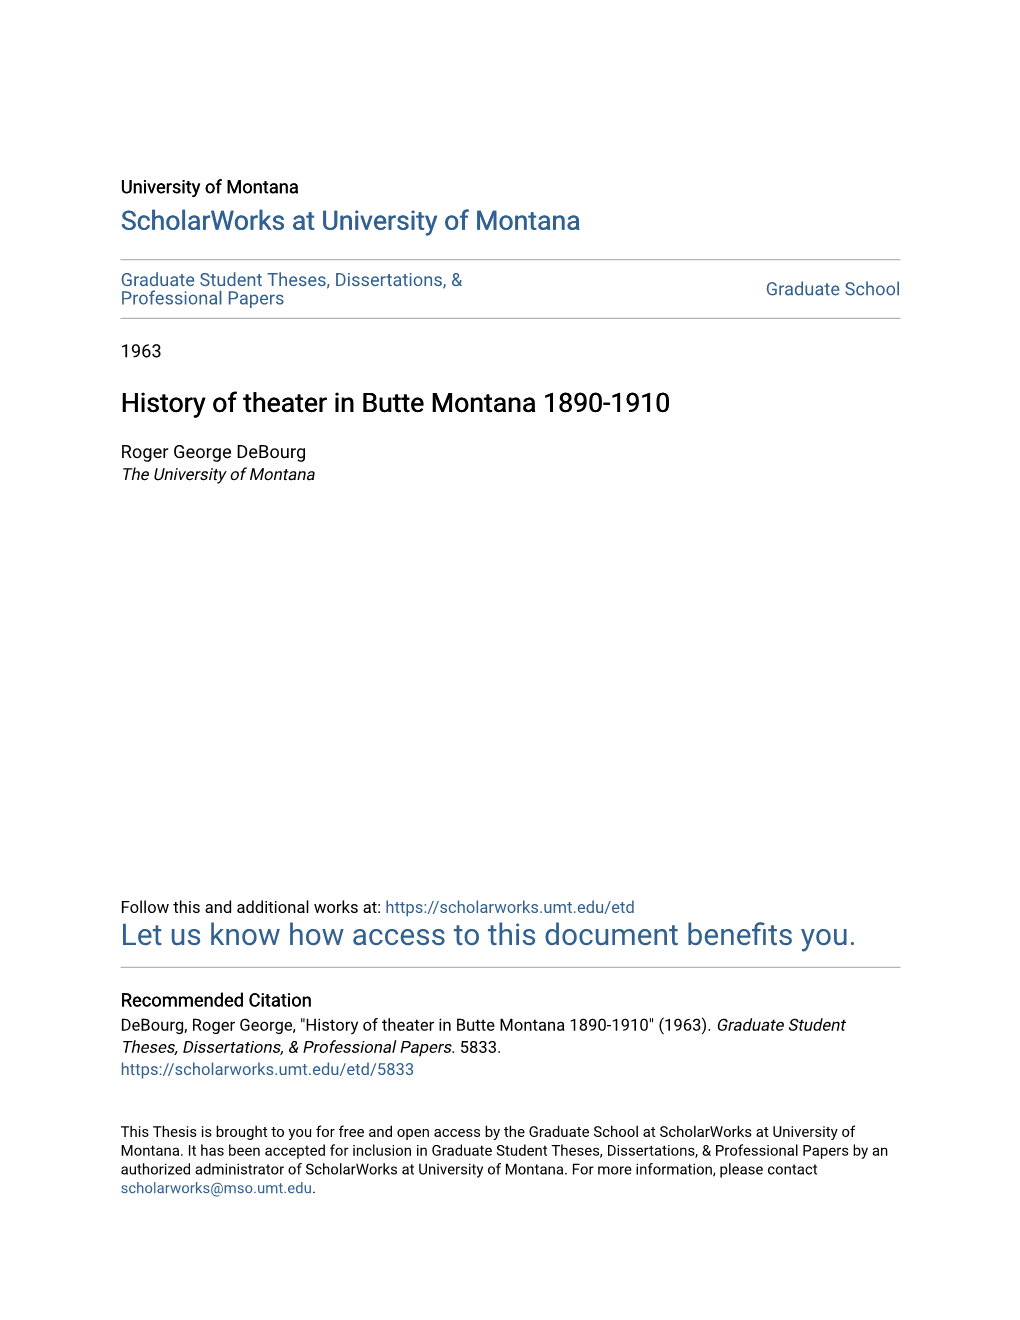 History of Theater in Butte Montana 1890-1910